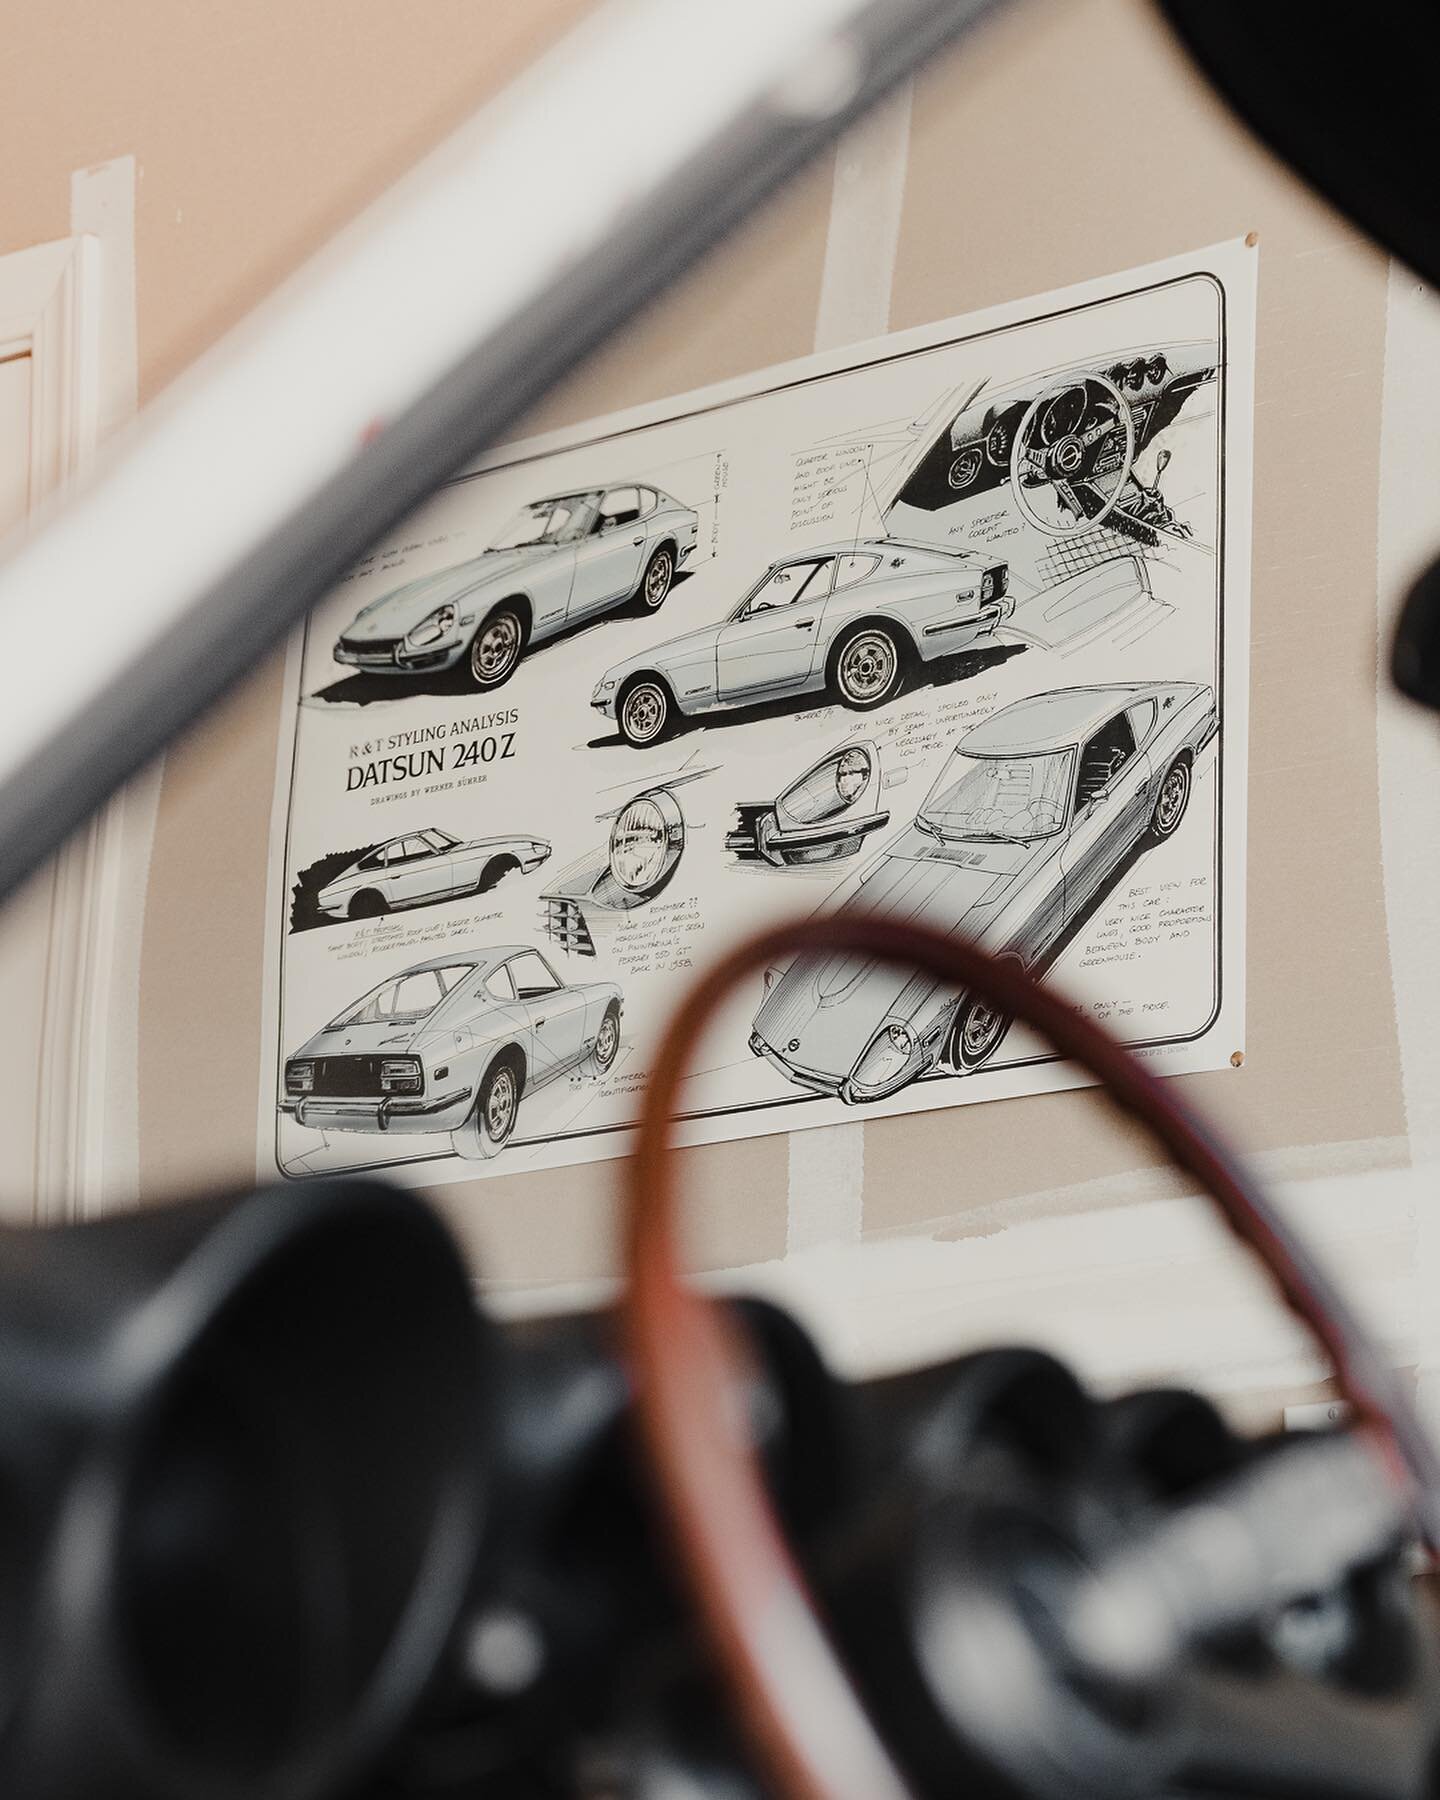 A @roadandtrack magazine clipping from the &lsquo;70s featuring illustrations by #wernerbuhrer, digitally remastered by @zatsuma.
So awe-inspiring having this piece of history hanging in the garage. Must add more.